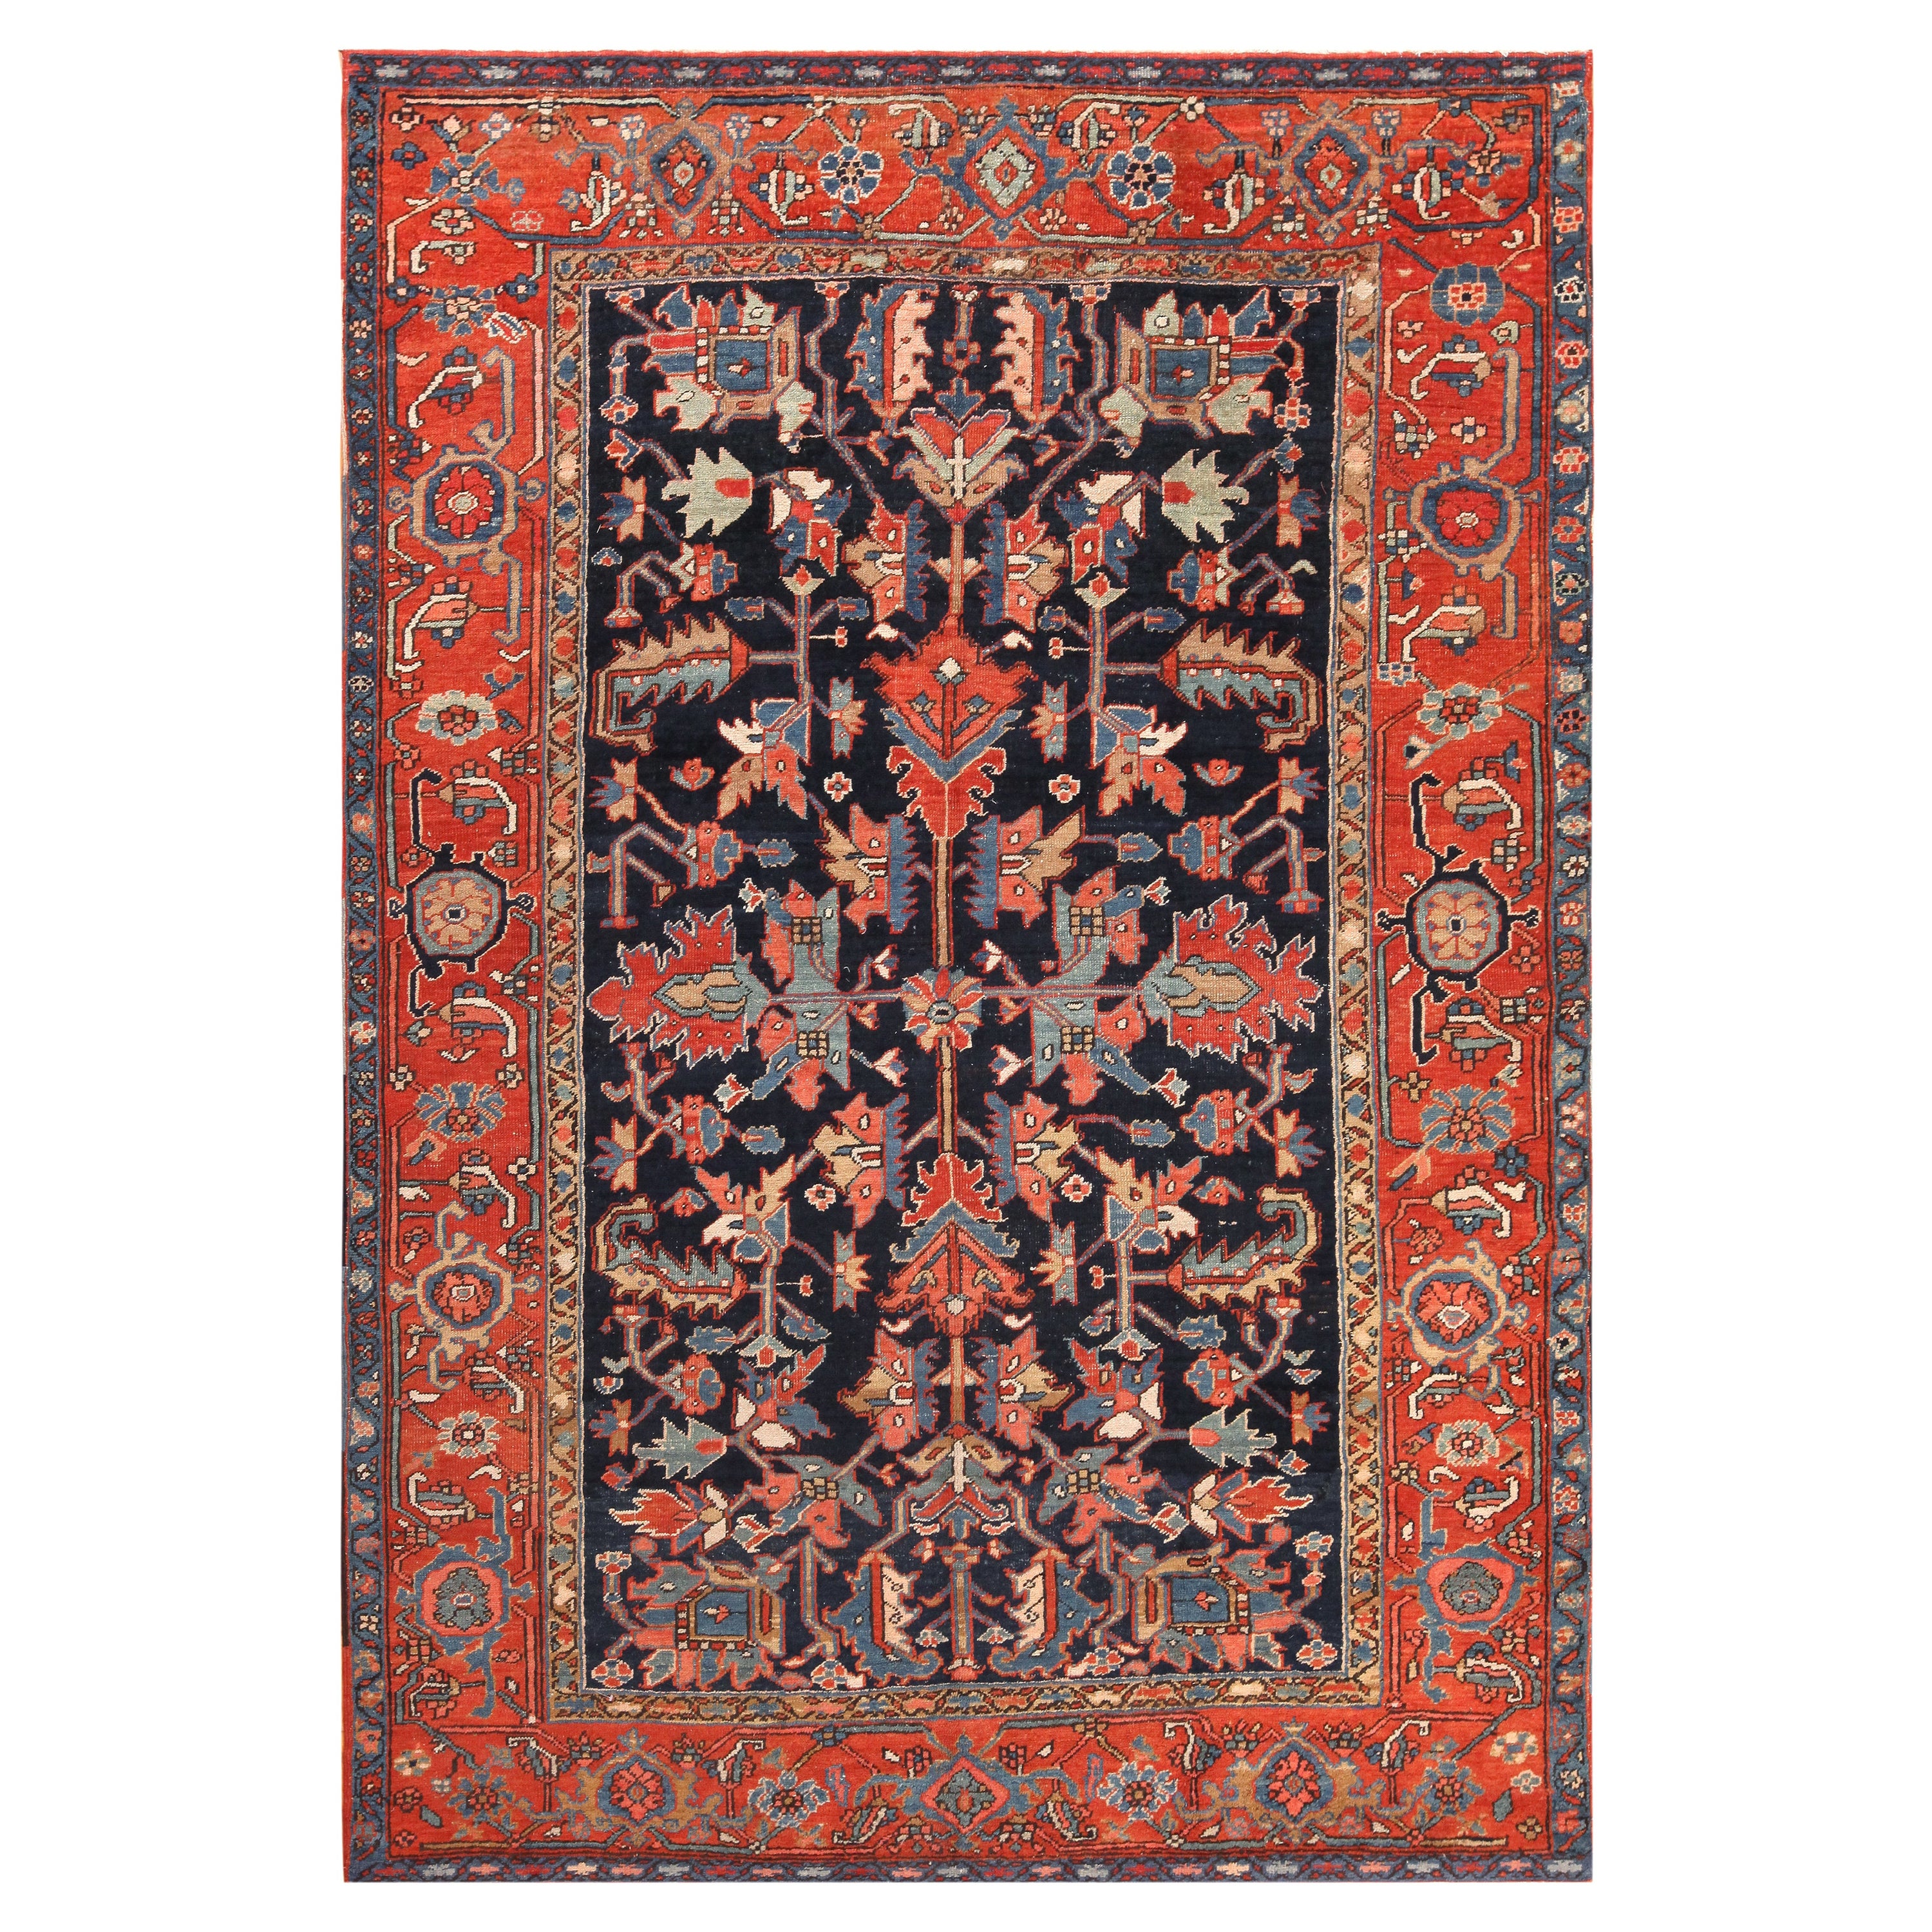 Nazmiyal Collection Antique Persian Heriz Rug. 6 ft 4 in x 9 ft